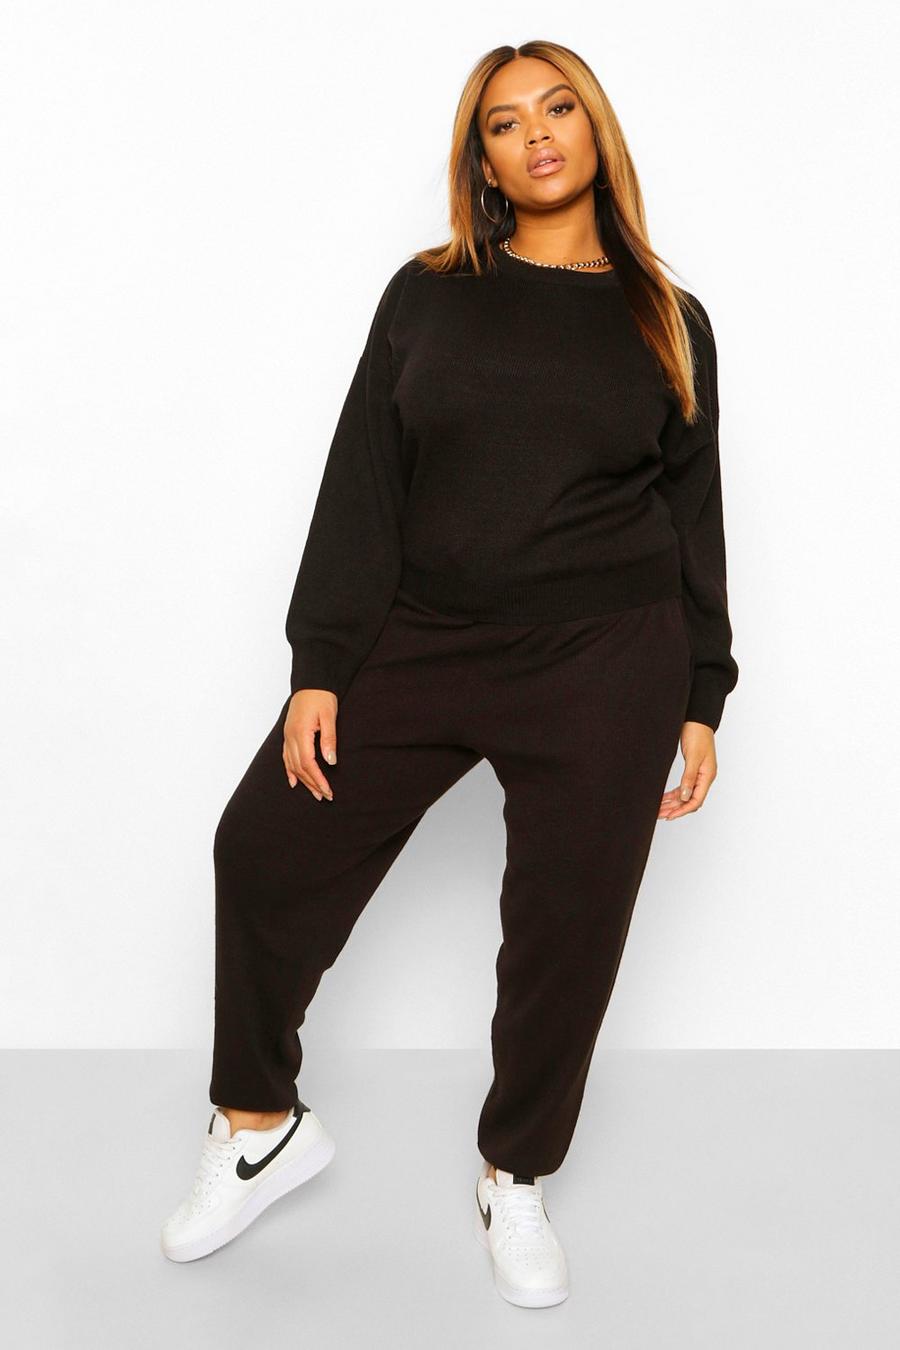 Black Plus Knitted Jumper And Track Pant Co-Ord